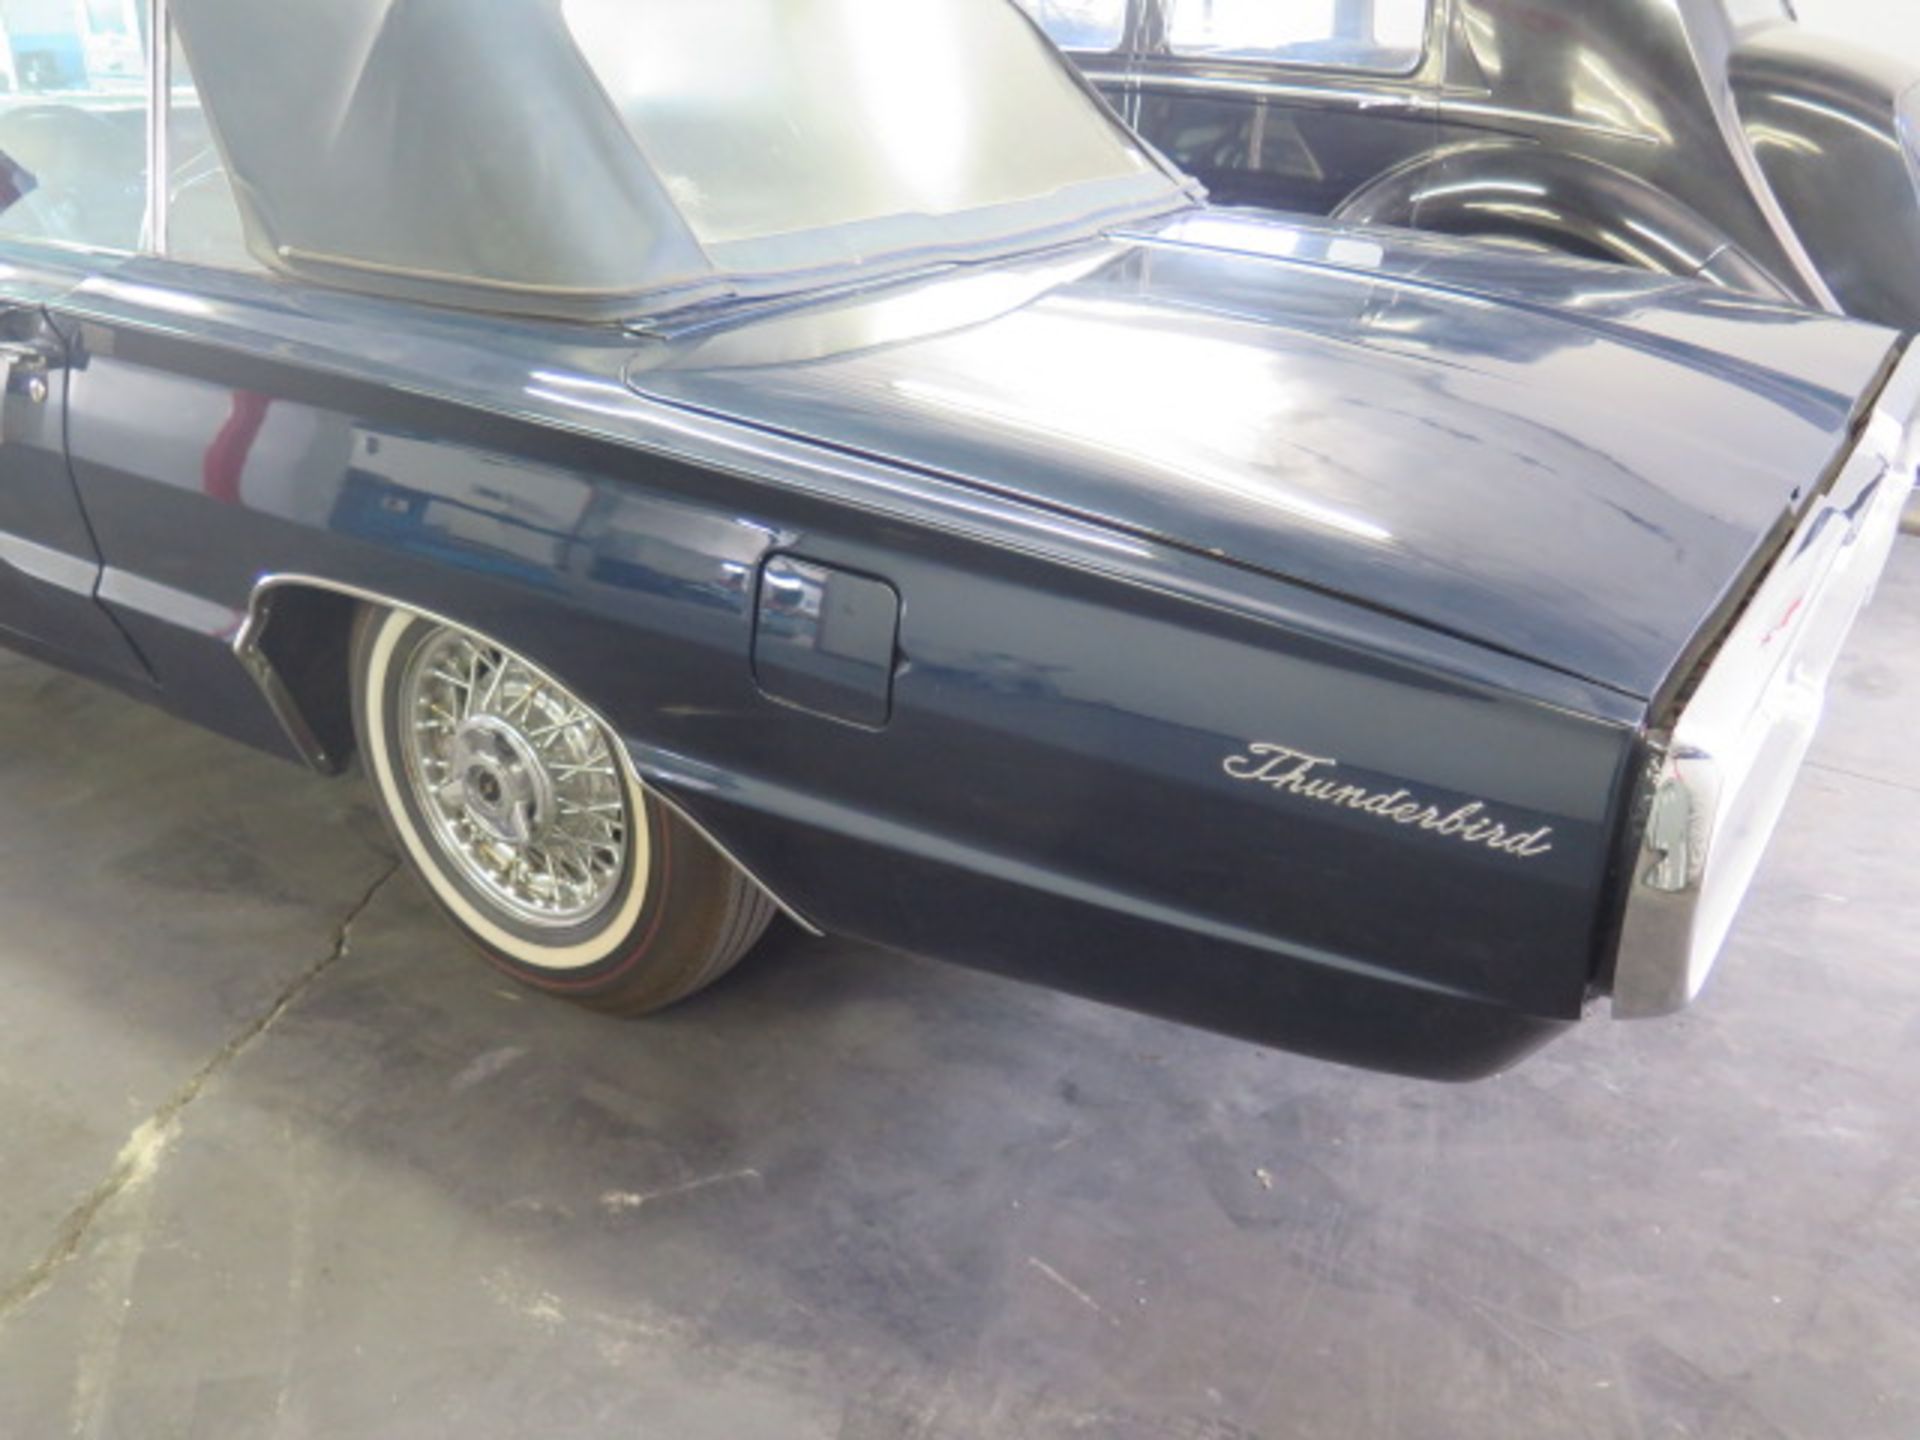 1966 Ford Thunderbird Convertible w/ “Q” Designation V8 428 CID 4 Barrel Carb Gas, SOLD AS IS - Image 5 of 46